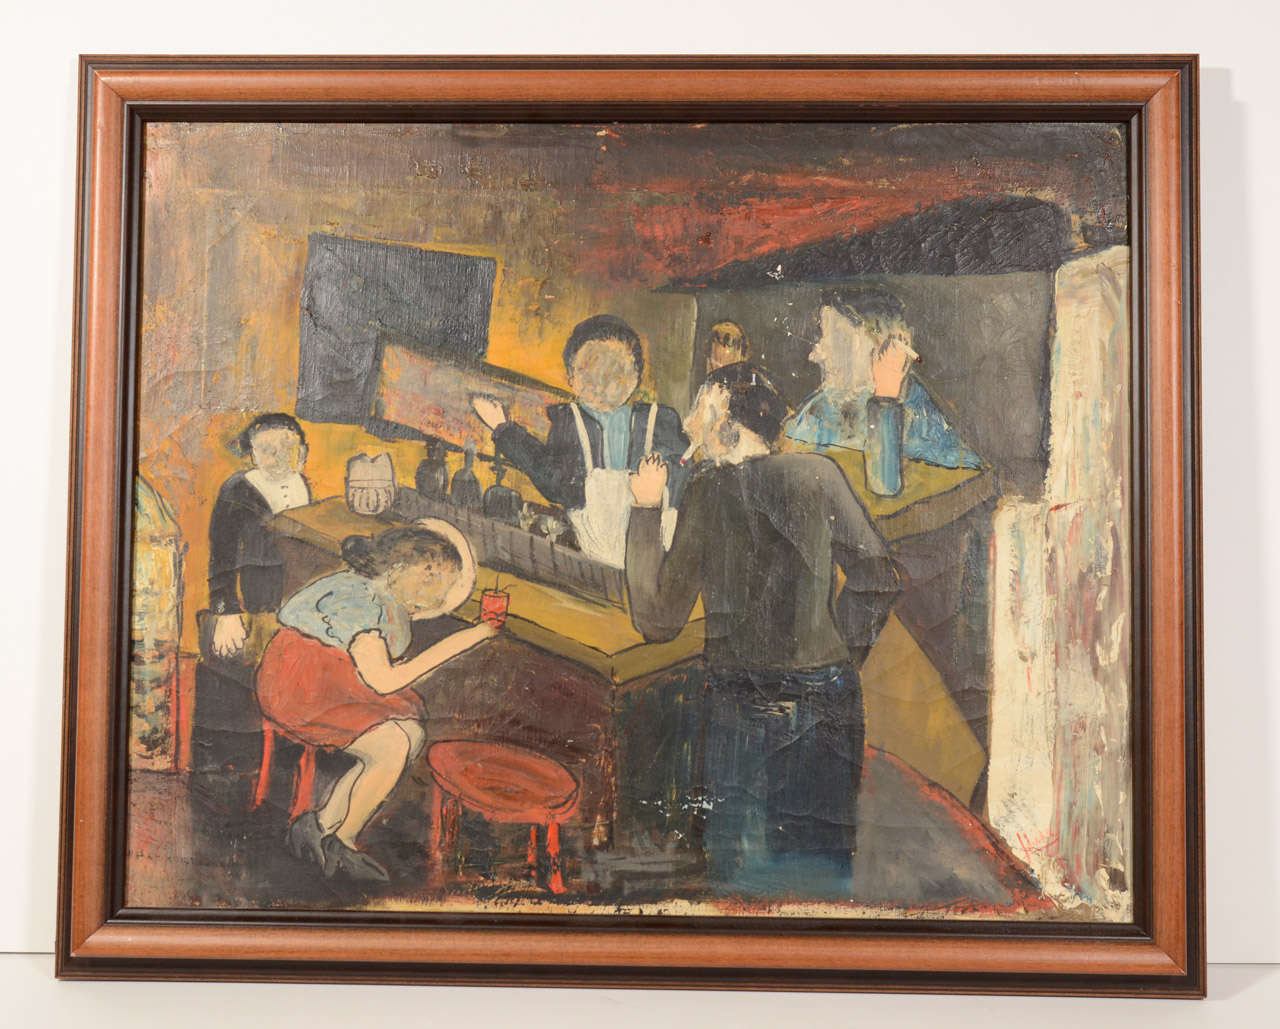 Brilliant oil on canvas abstract figural painting depicting a bar scene in Europe, probably France. Painting is mounted in original hand carved wood shadowbox frame in mahogany and ebonized walnut with gilded details. Signed by Artist.  Actual